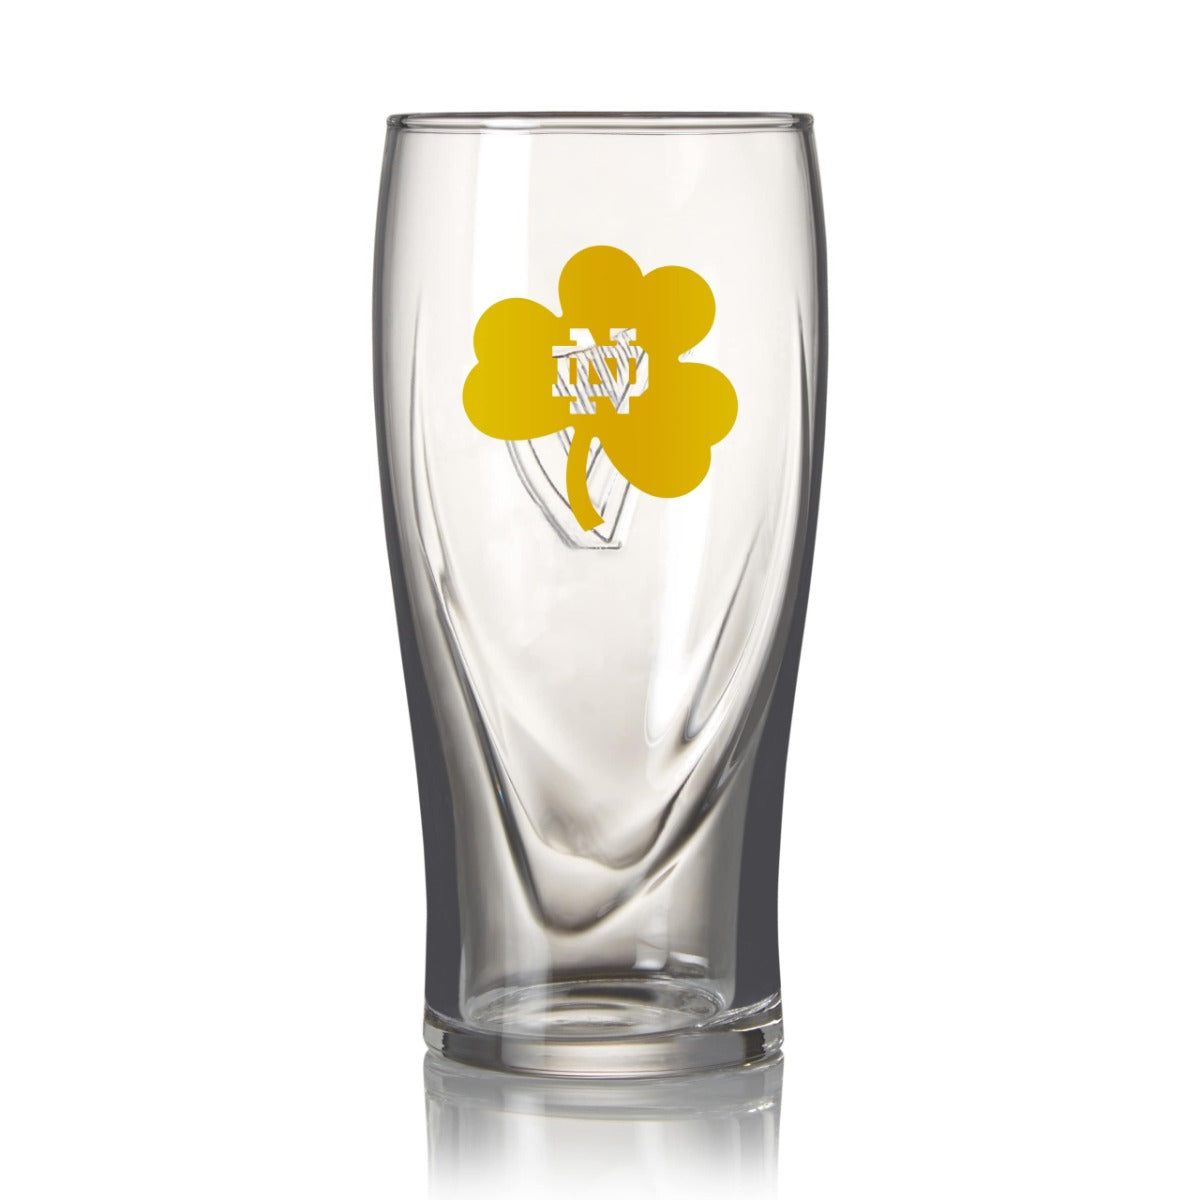 A Notre Dame Guinness 16oz Pint Glass 2 Pack with a shamrock on it.